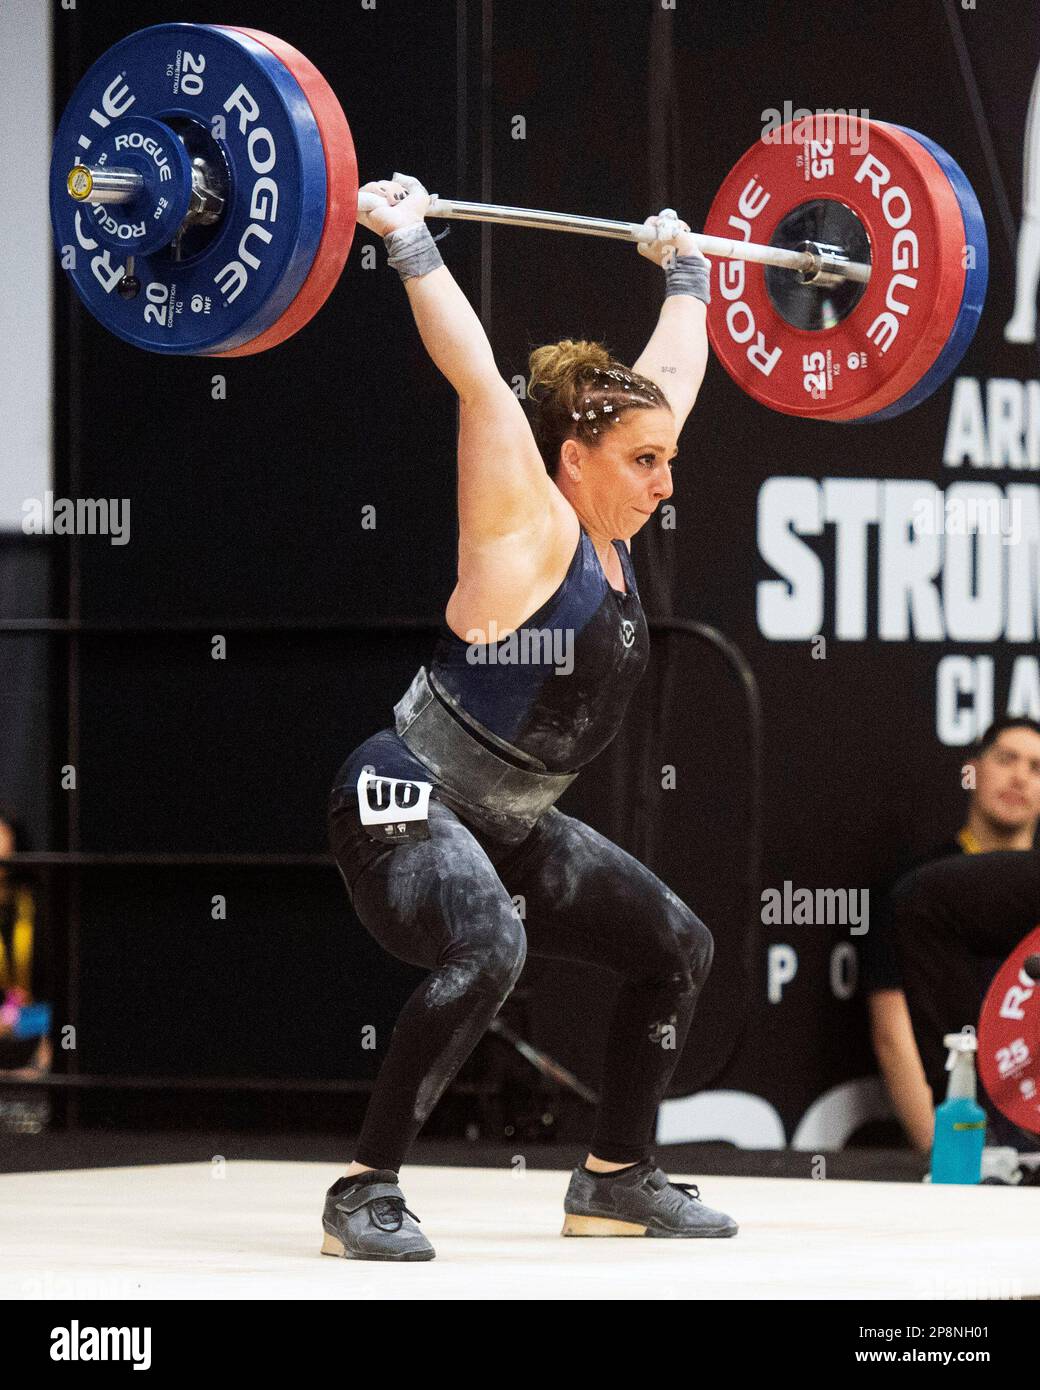 Columbus, Ohio, United States. 3th Mar, 2023. Shelby Pflug competes in the clean and jerk in the Women's 64kg category at the Rogue Stage in Columbus, Ohio, USA. Credit: Brent Clark/Alamy Live News Stock Photo